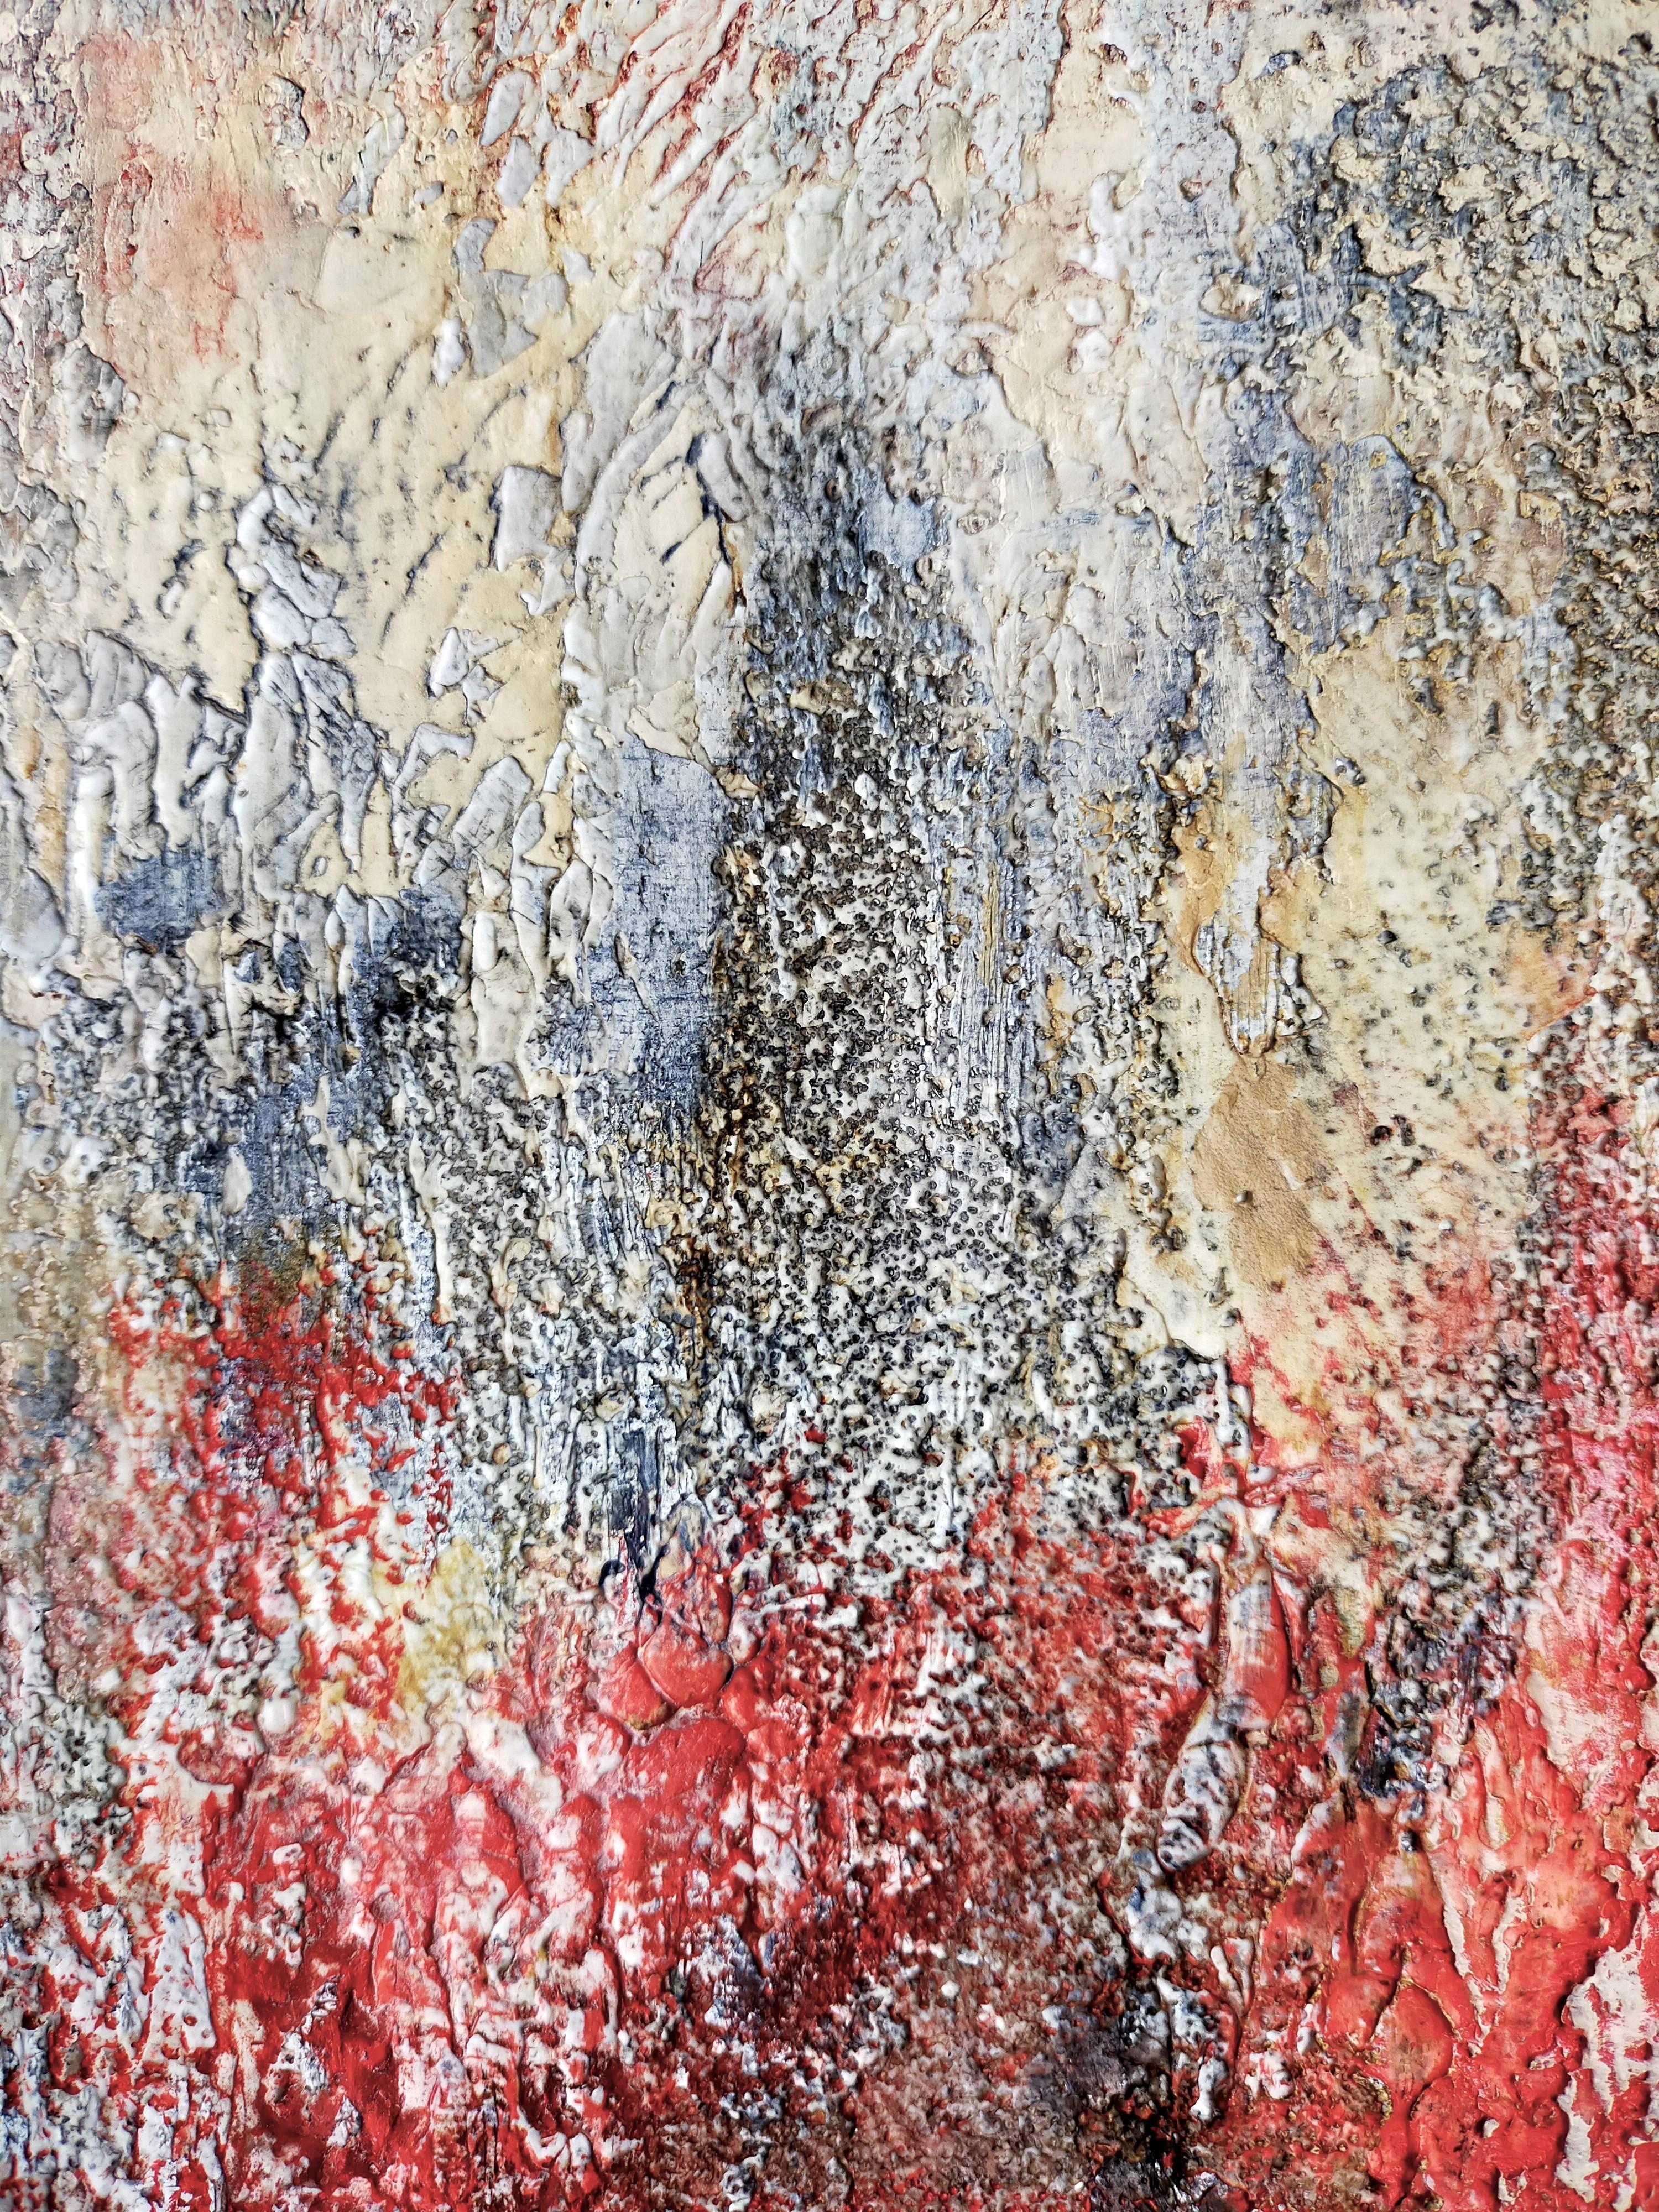 abstract acrylic marble linen canvas 50x100cm send in wood crate at cost
All the battles, the bloodshed for so many reasons.